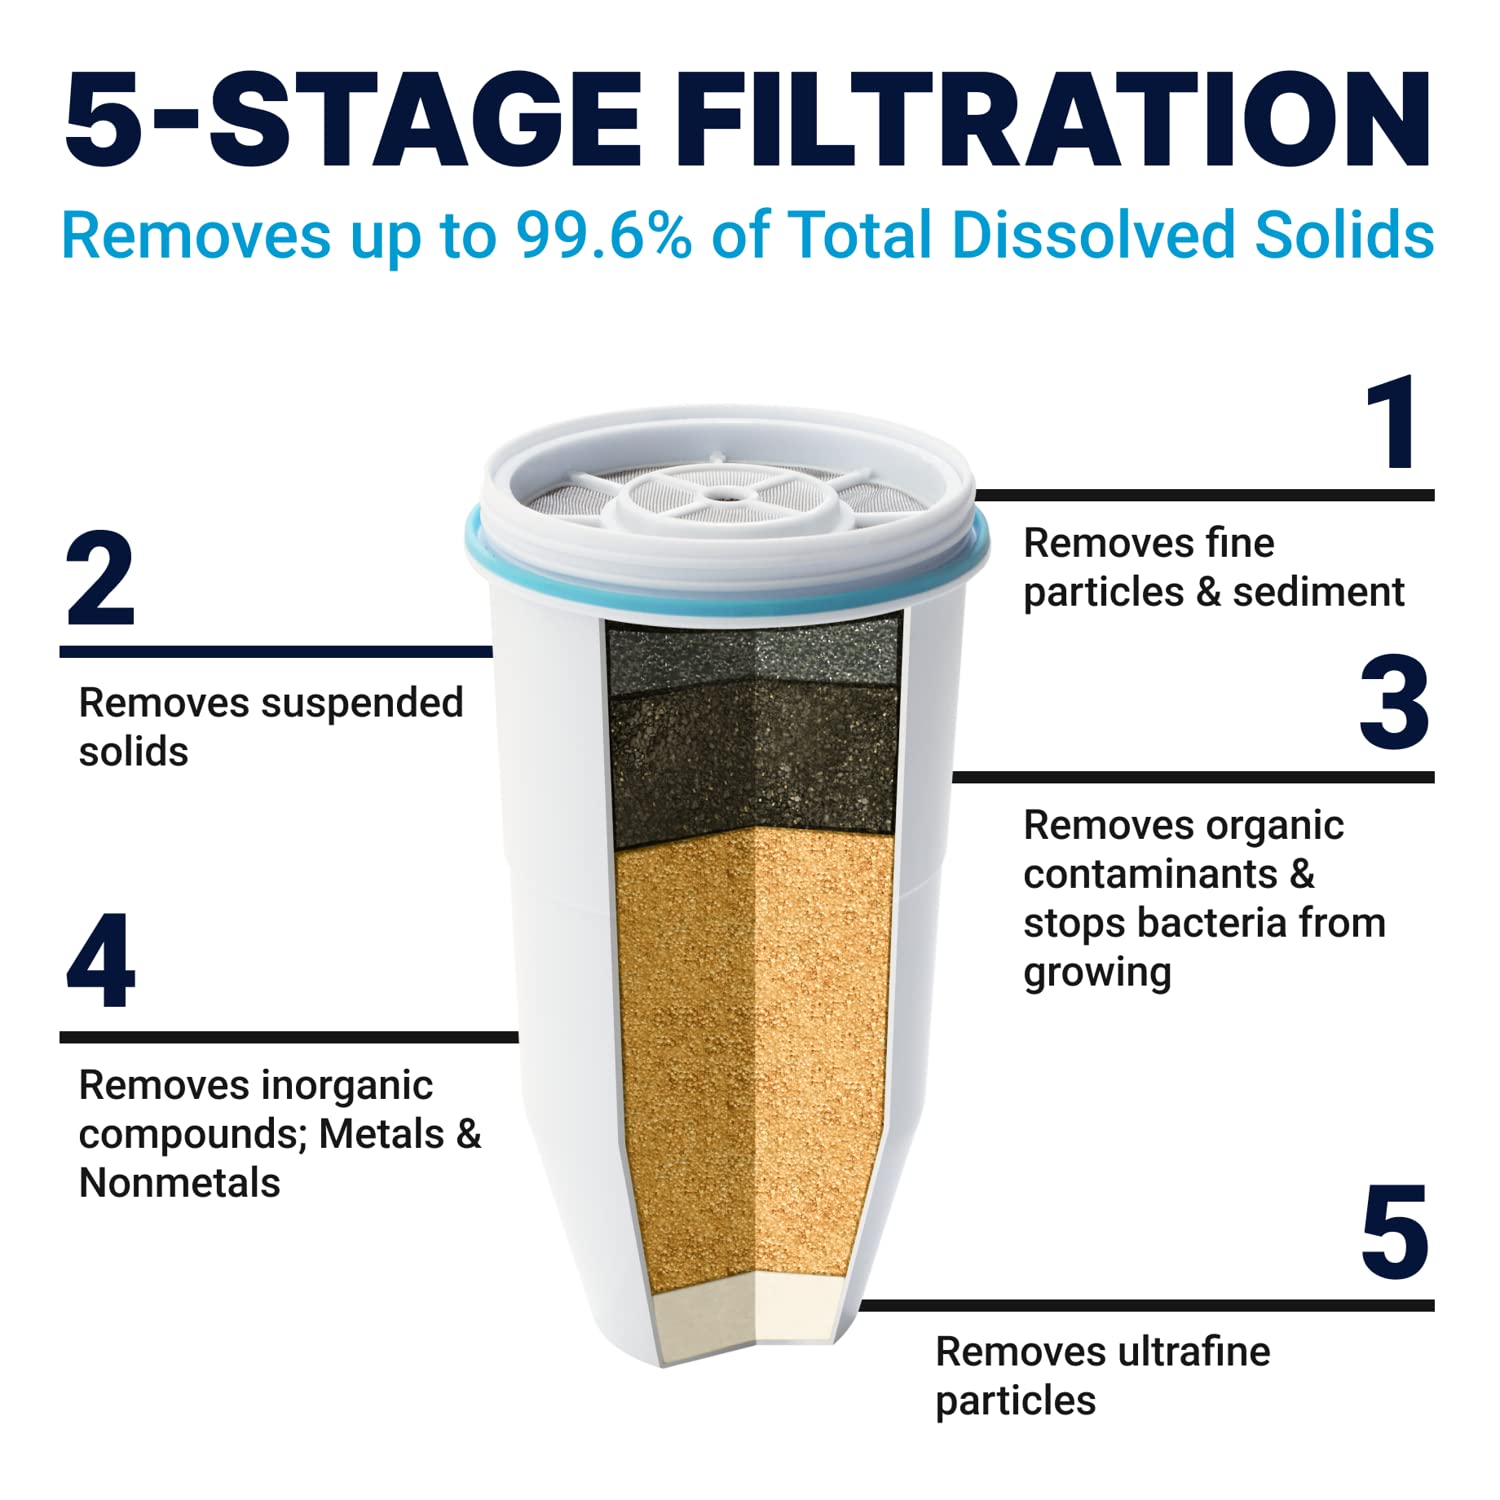 ZeroWater Official Replacement Filter - 5-Stage Filter Replacement 0 TDS for Improved Tap Water Taste - NSF Certified to Reduce Lead, Chromium, and PFOA/PFOS, 6-Pack